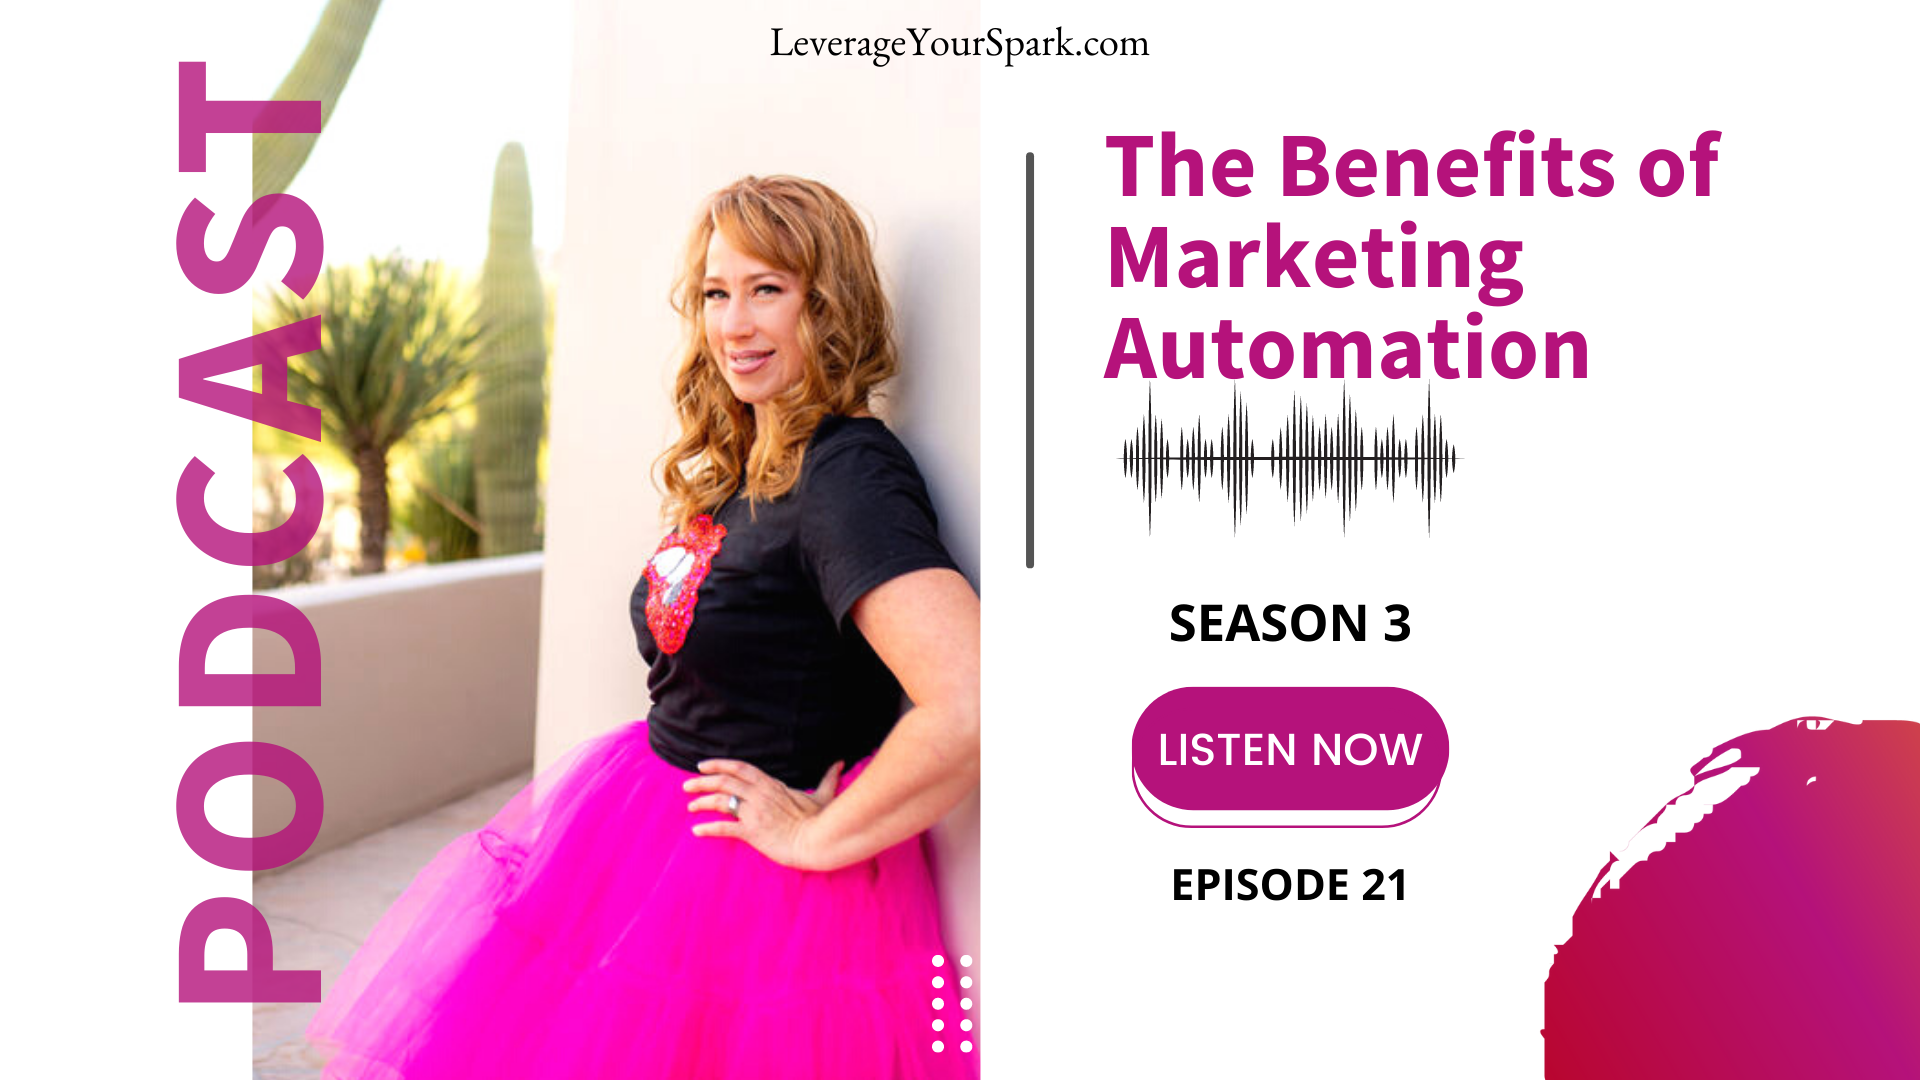 The Benefits of Marketing Automation